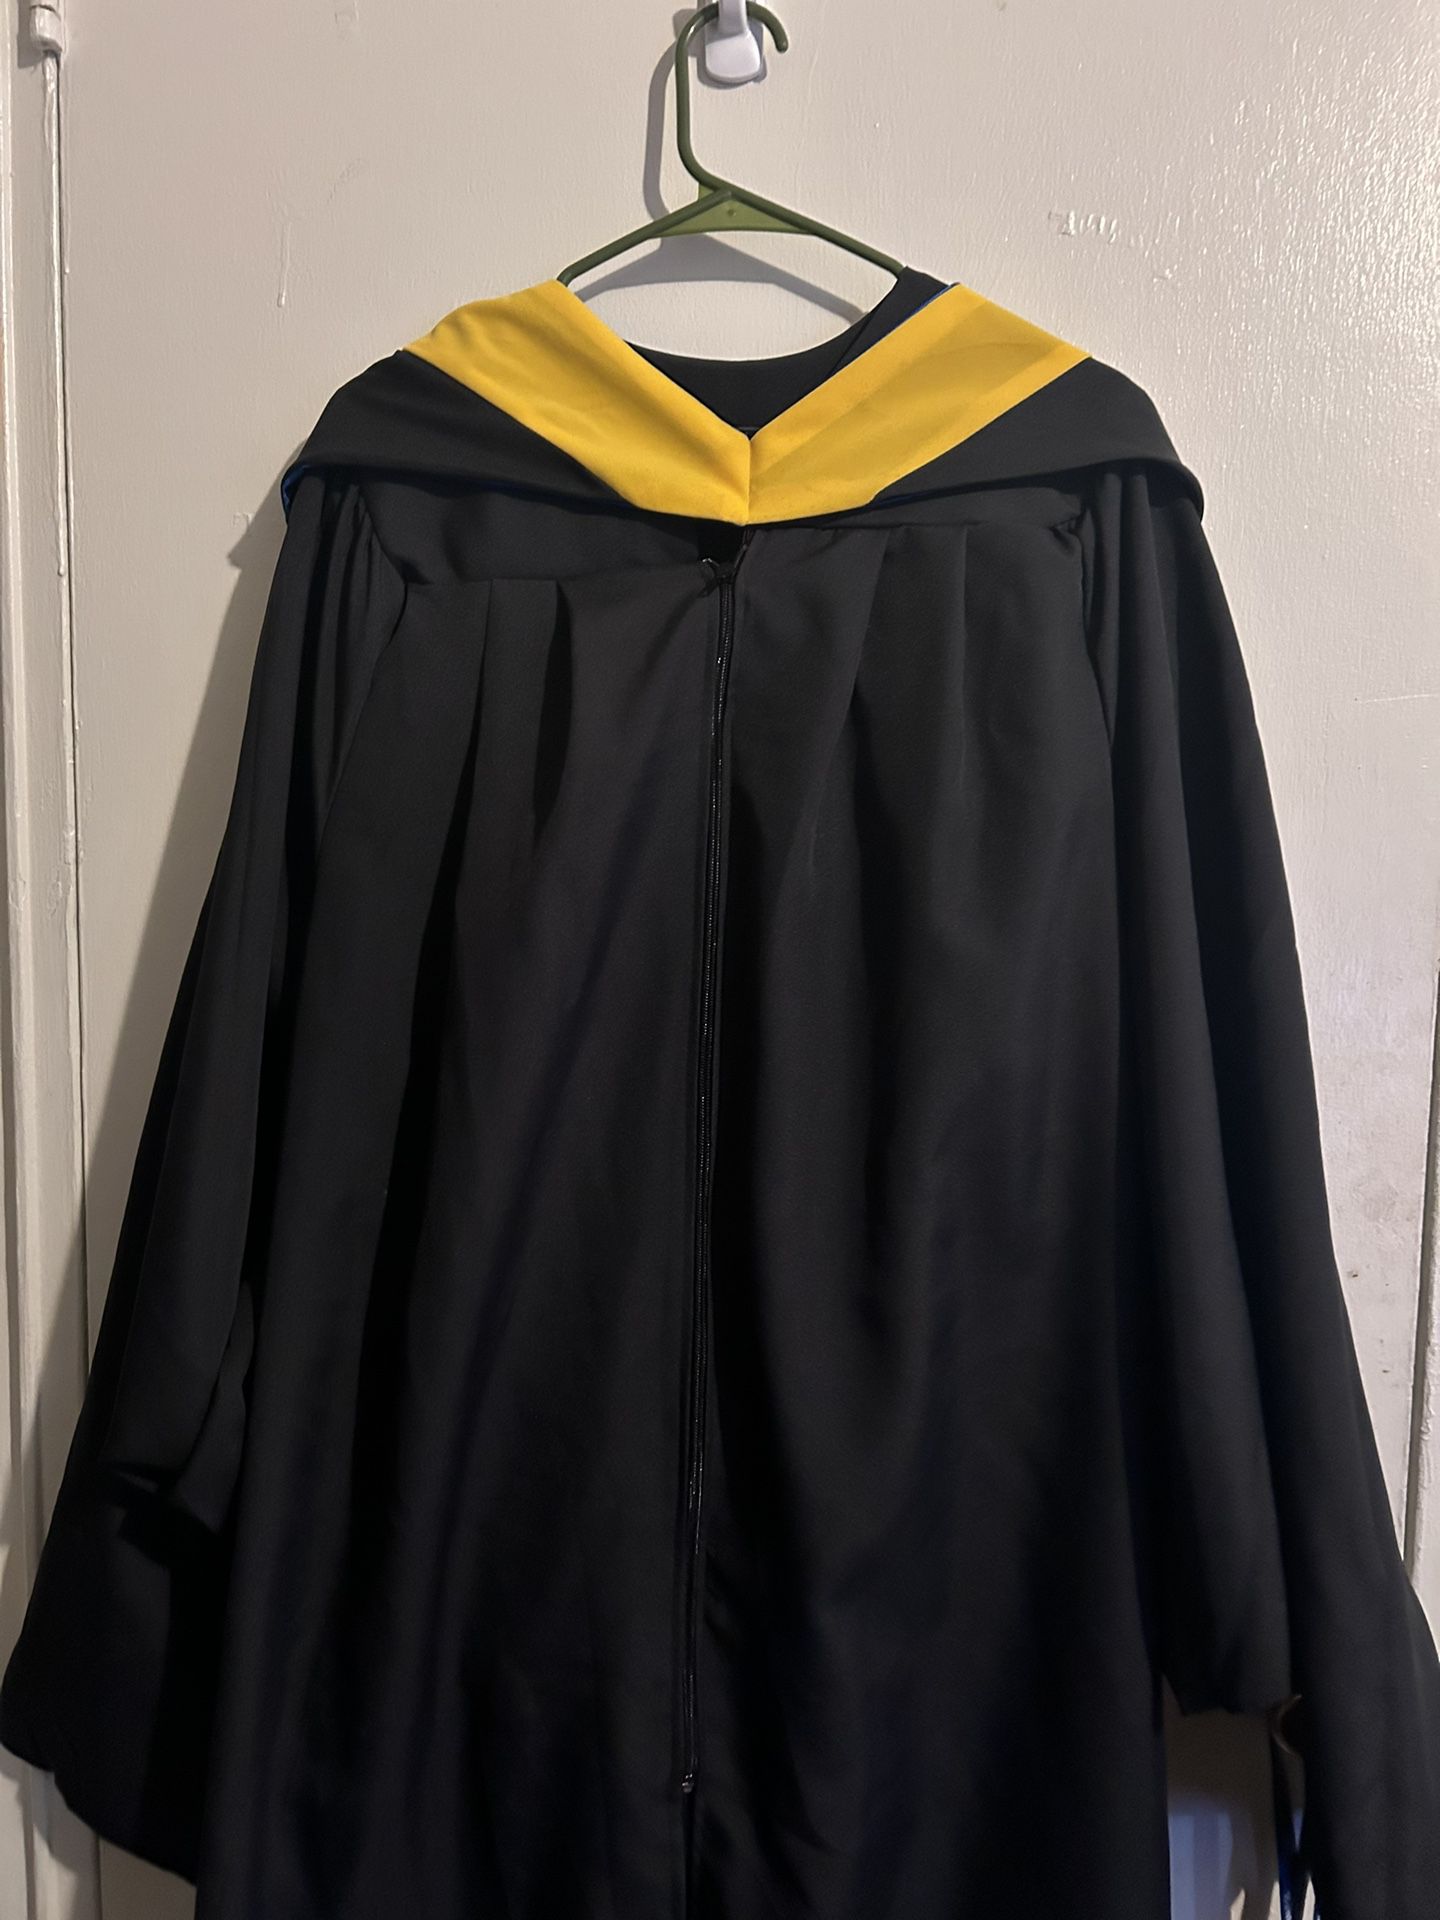 Masters Hood And Gown - With Cap